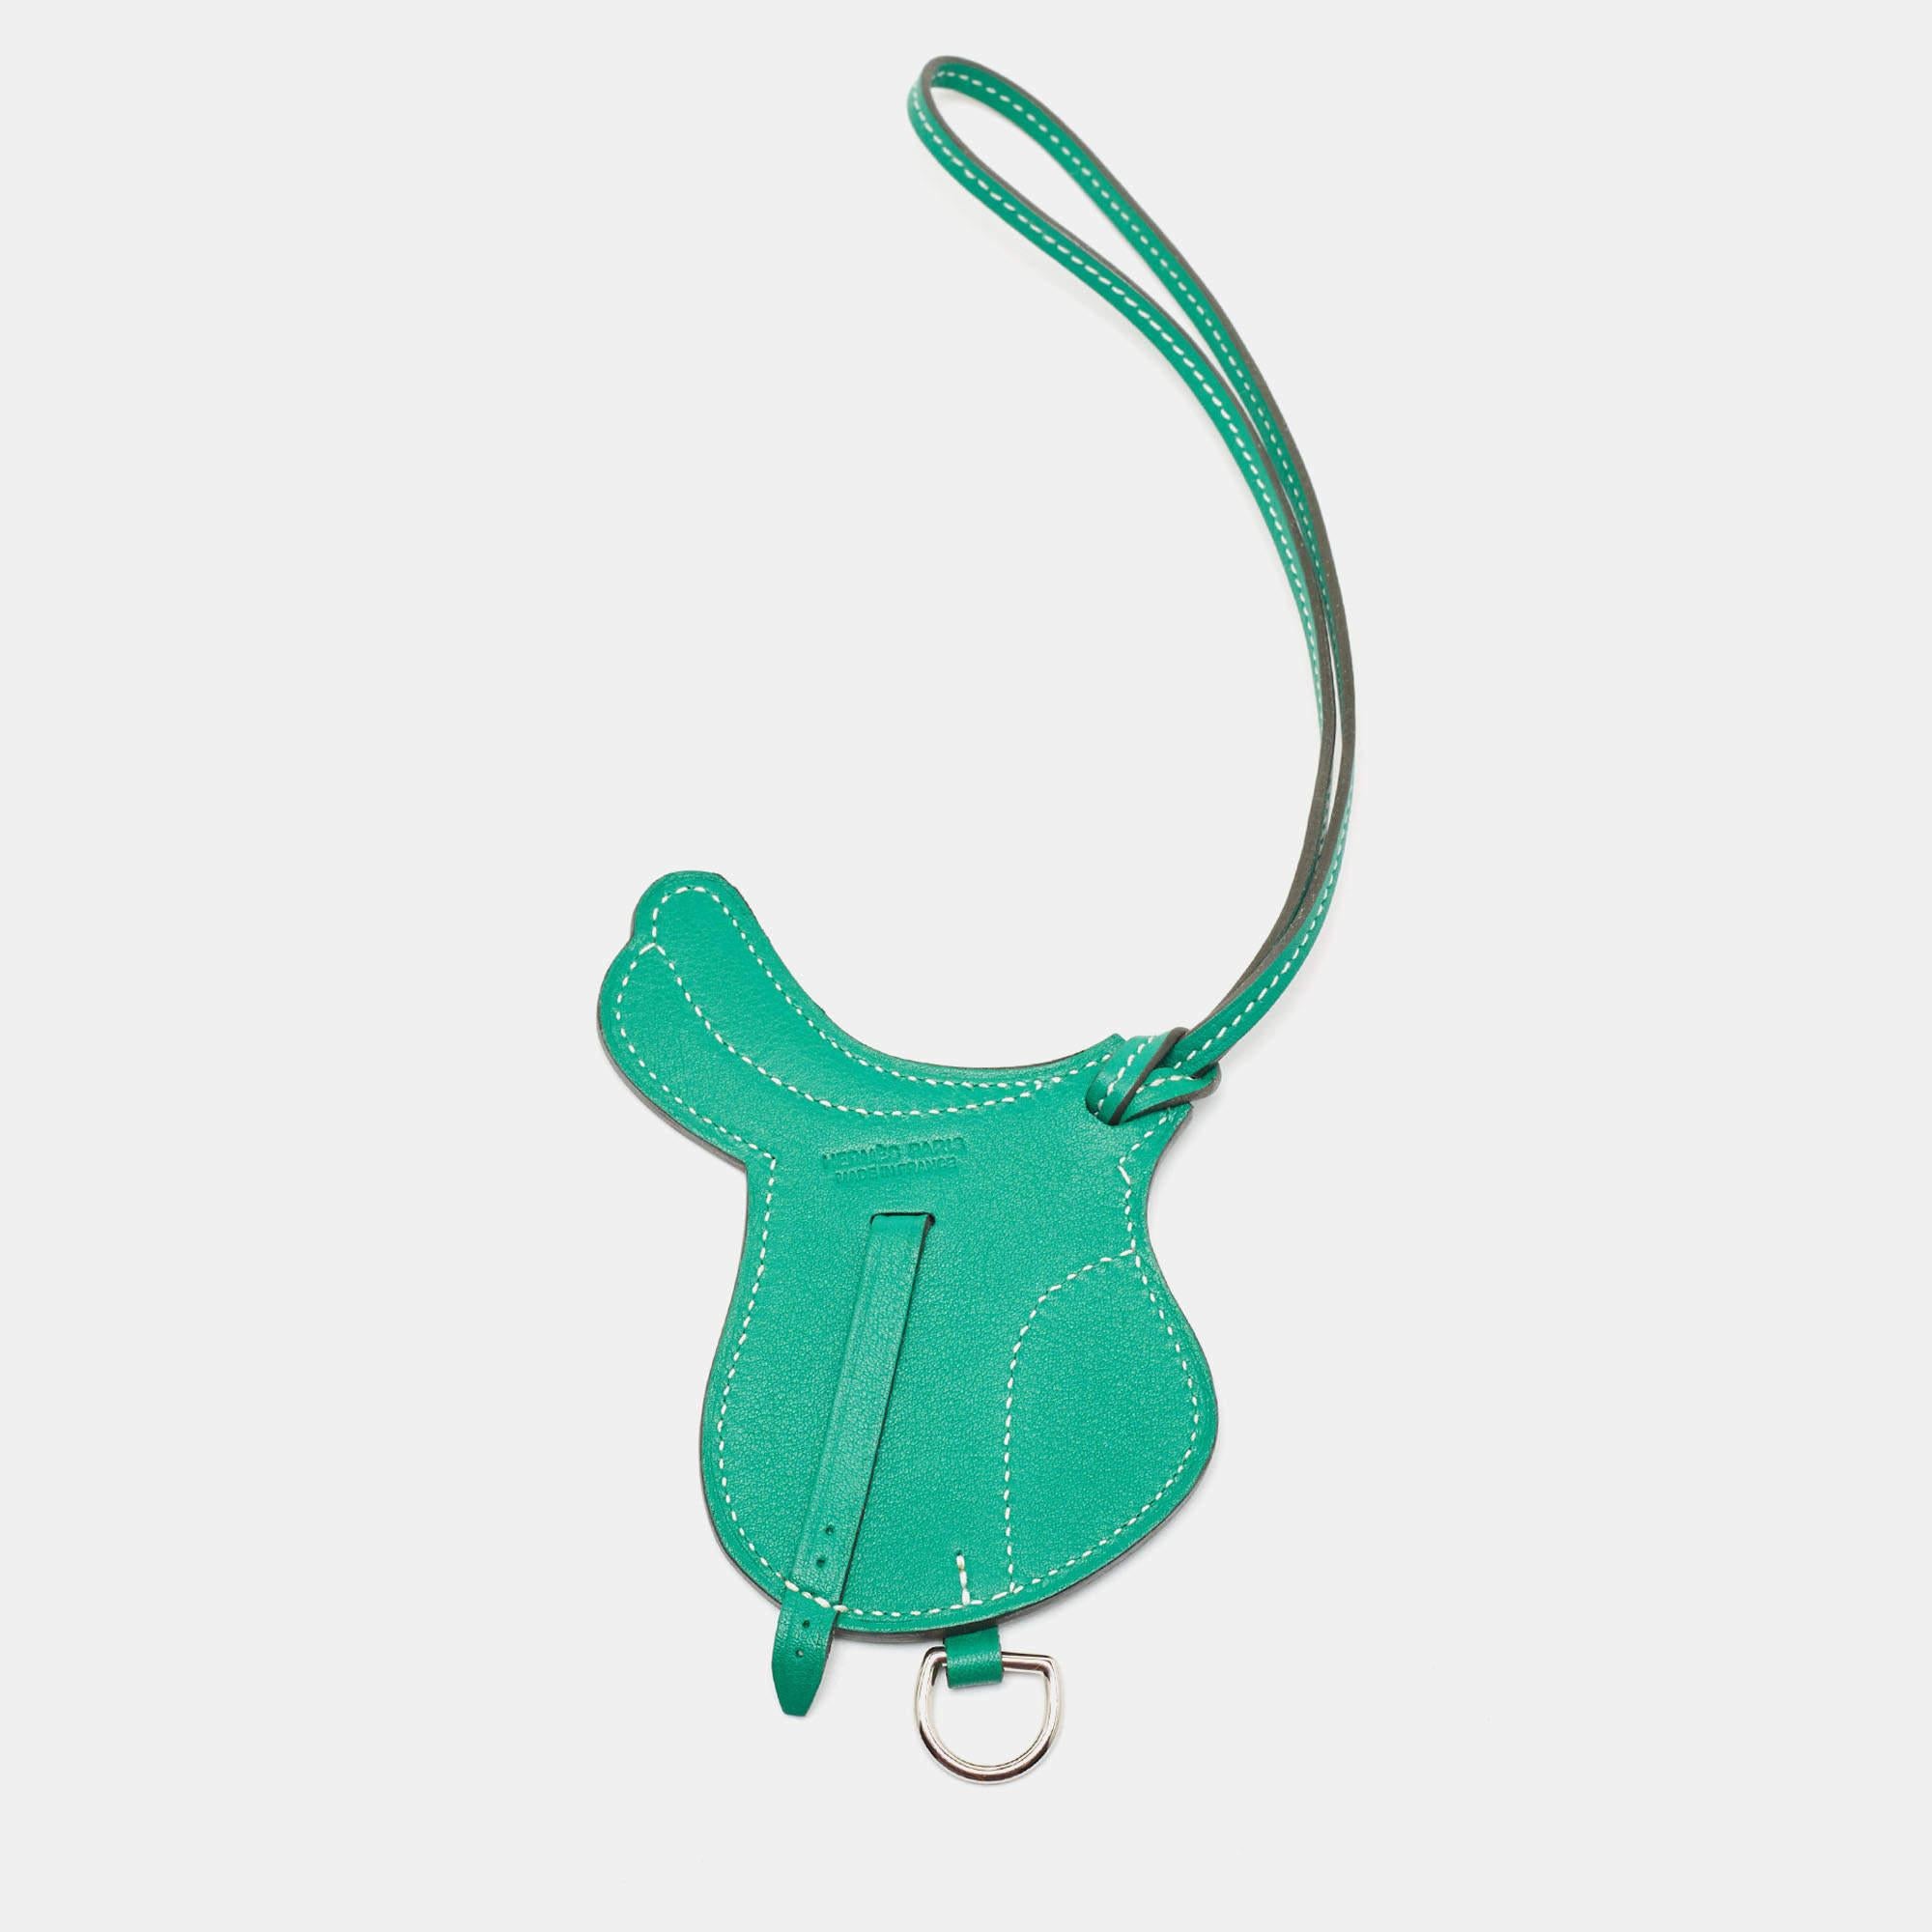 The Hermès Paddock Selle bag charm is an exquisite accessory crafted from luxurious Swift Leather. Its design features a captivating green shade. This charming piece perfectly complements any Hermès bag, adding a touch of elegance and